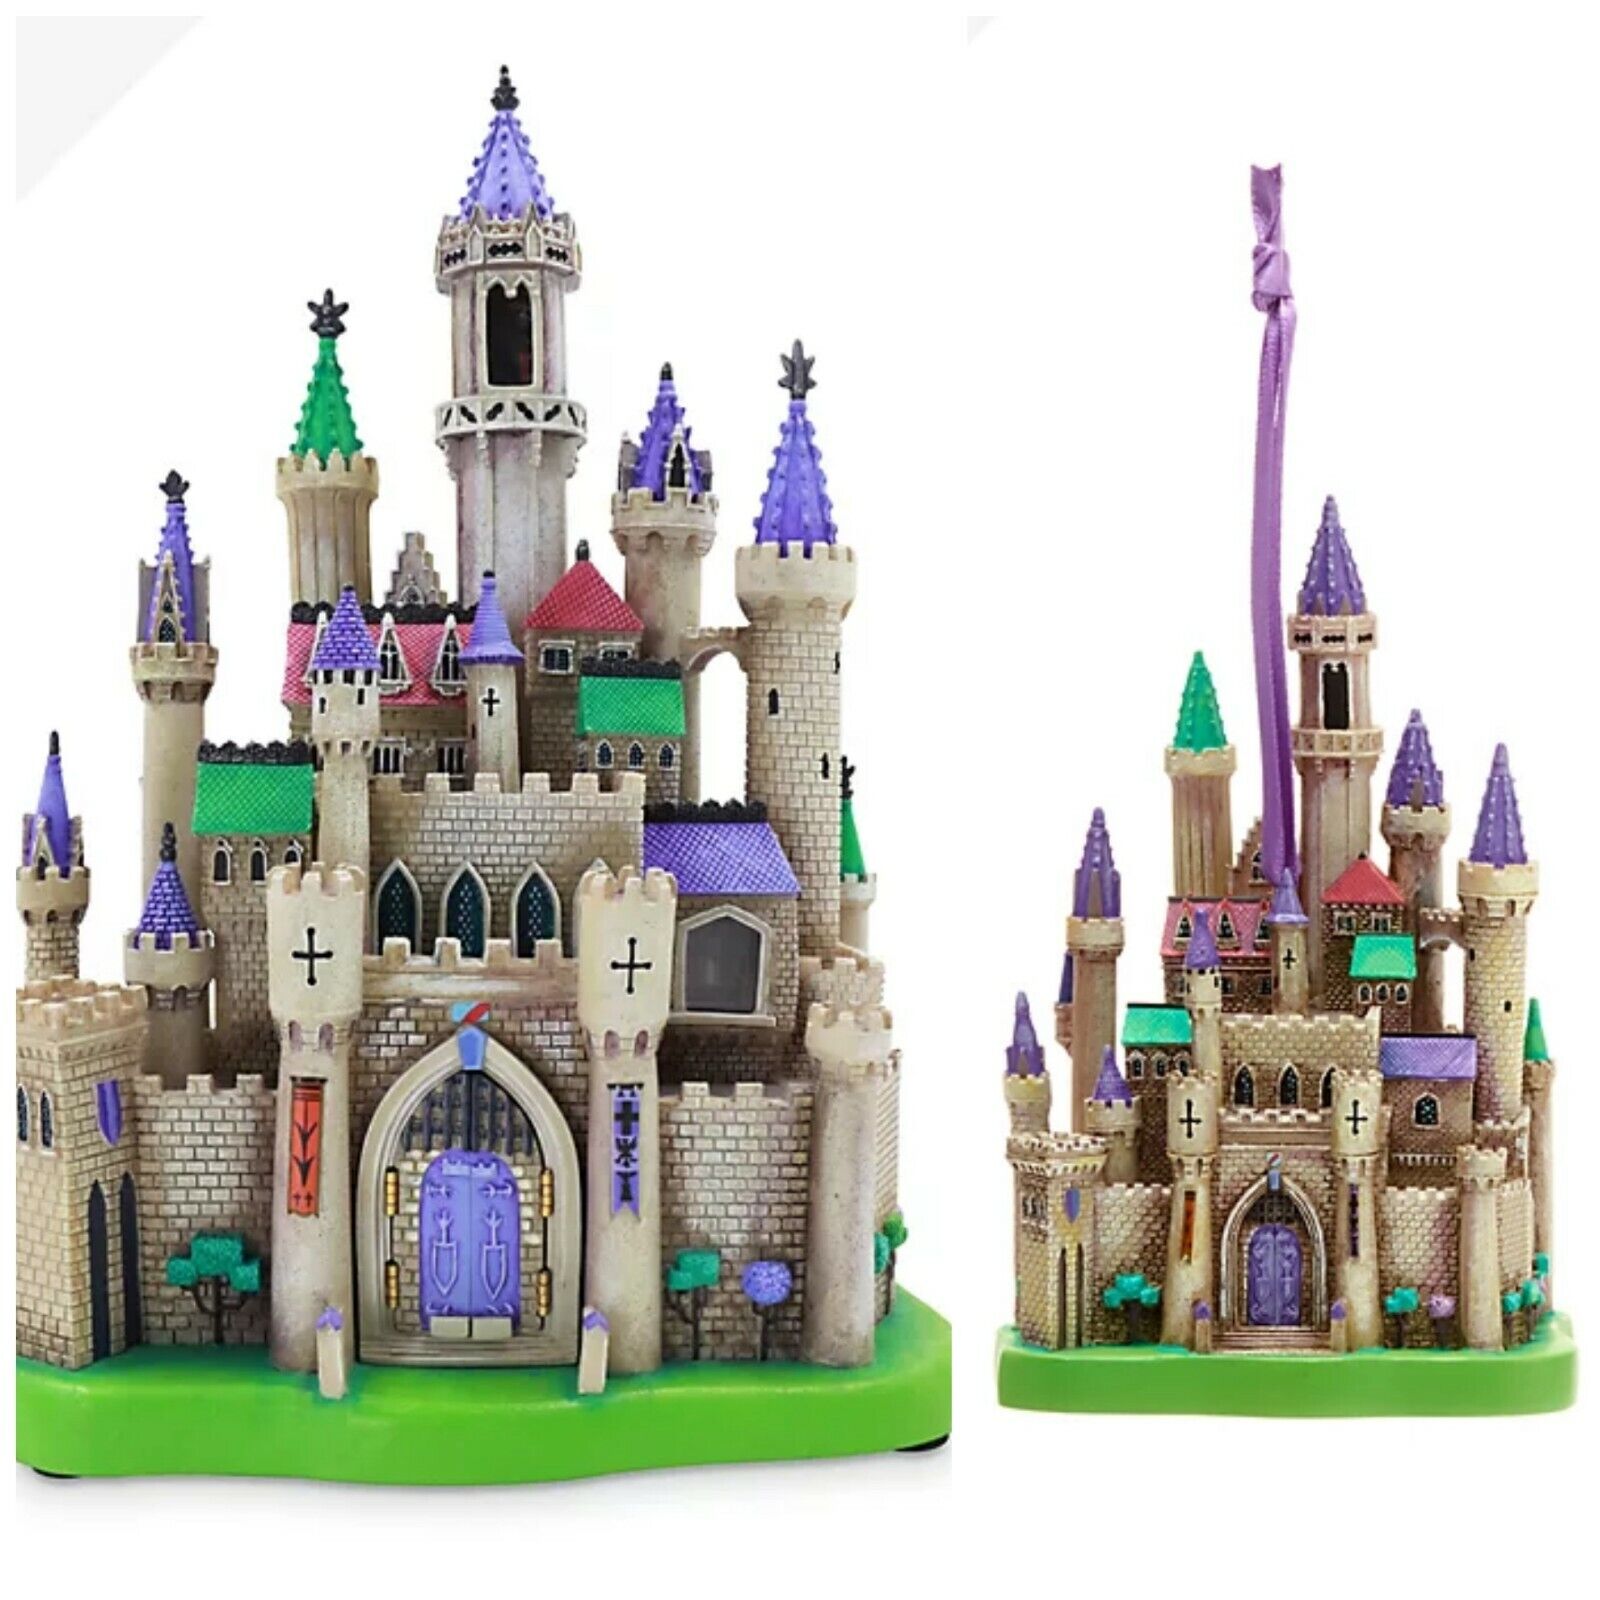 Disney Castle collection sleeping beauty light up and small hanging figurines